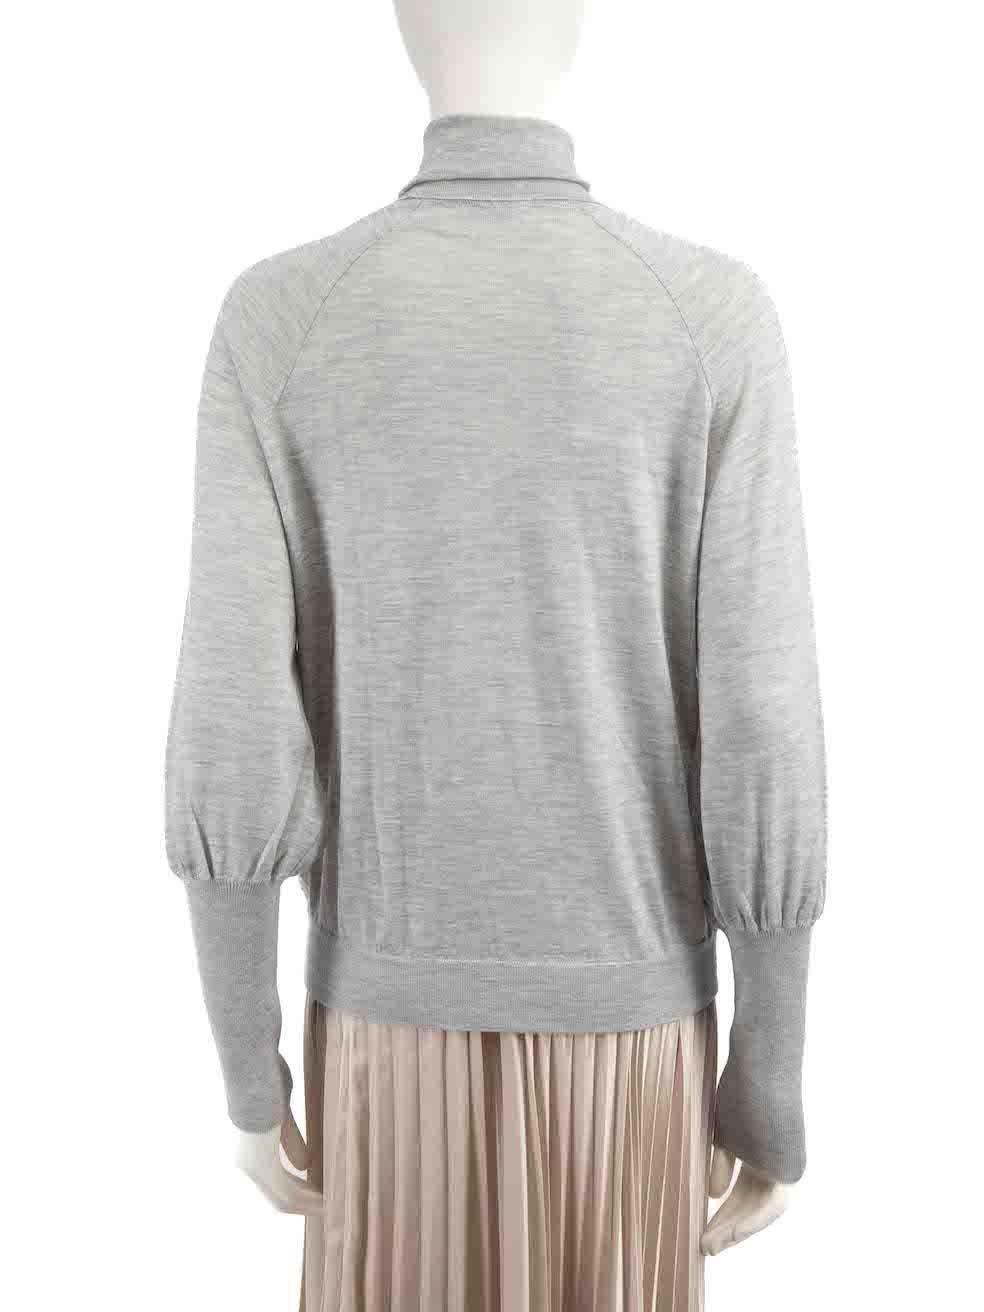 Brunello Cucinelli Grey Cashmere Beaded Turtleneck Top Size S In Good Condition For Sale In London, GB